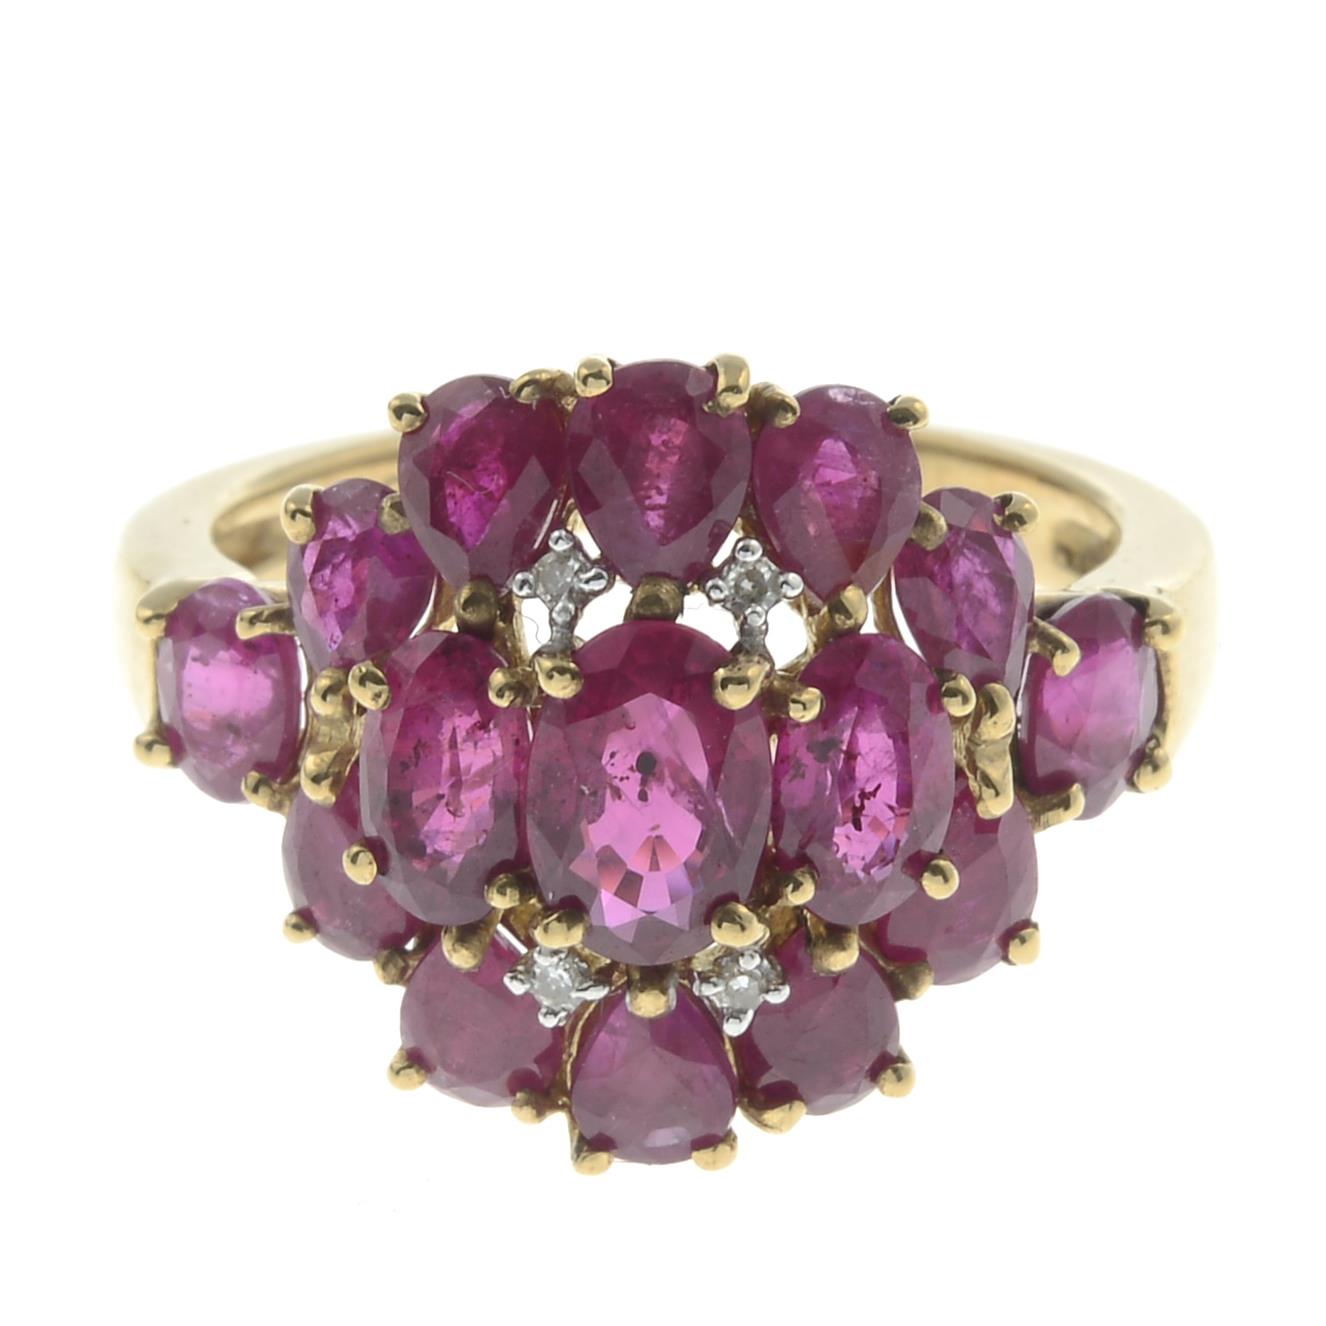 A 9ct gold glass-filled ruby and diamond dress ring.Hallmarks for Birmingham.Ring size J.